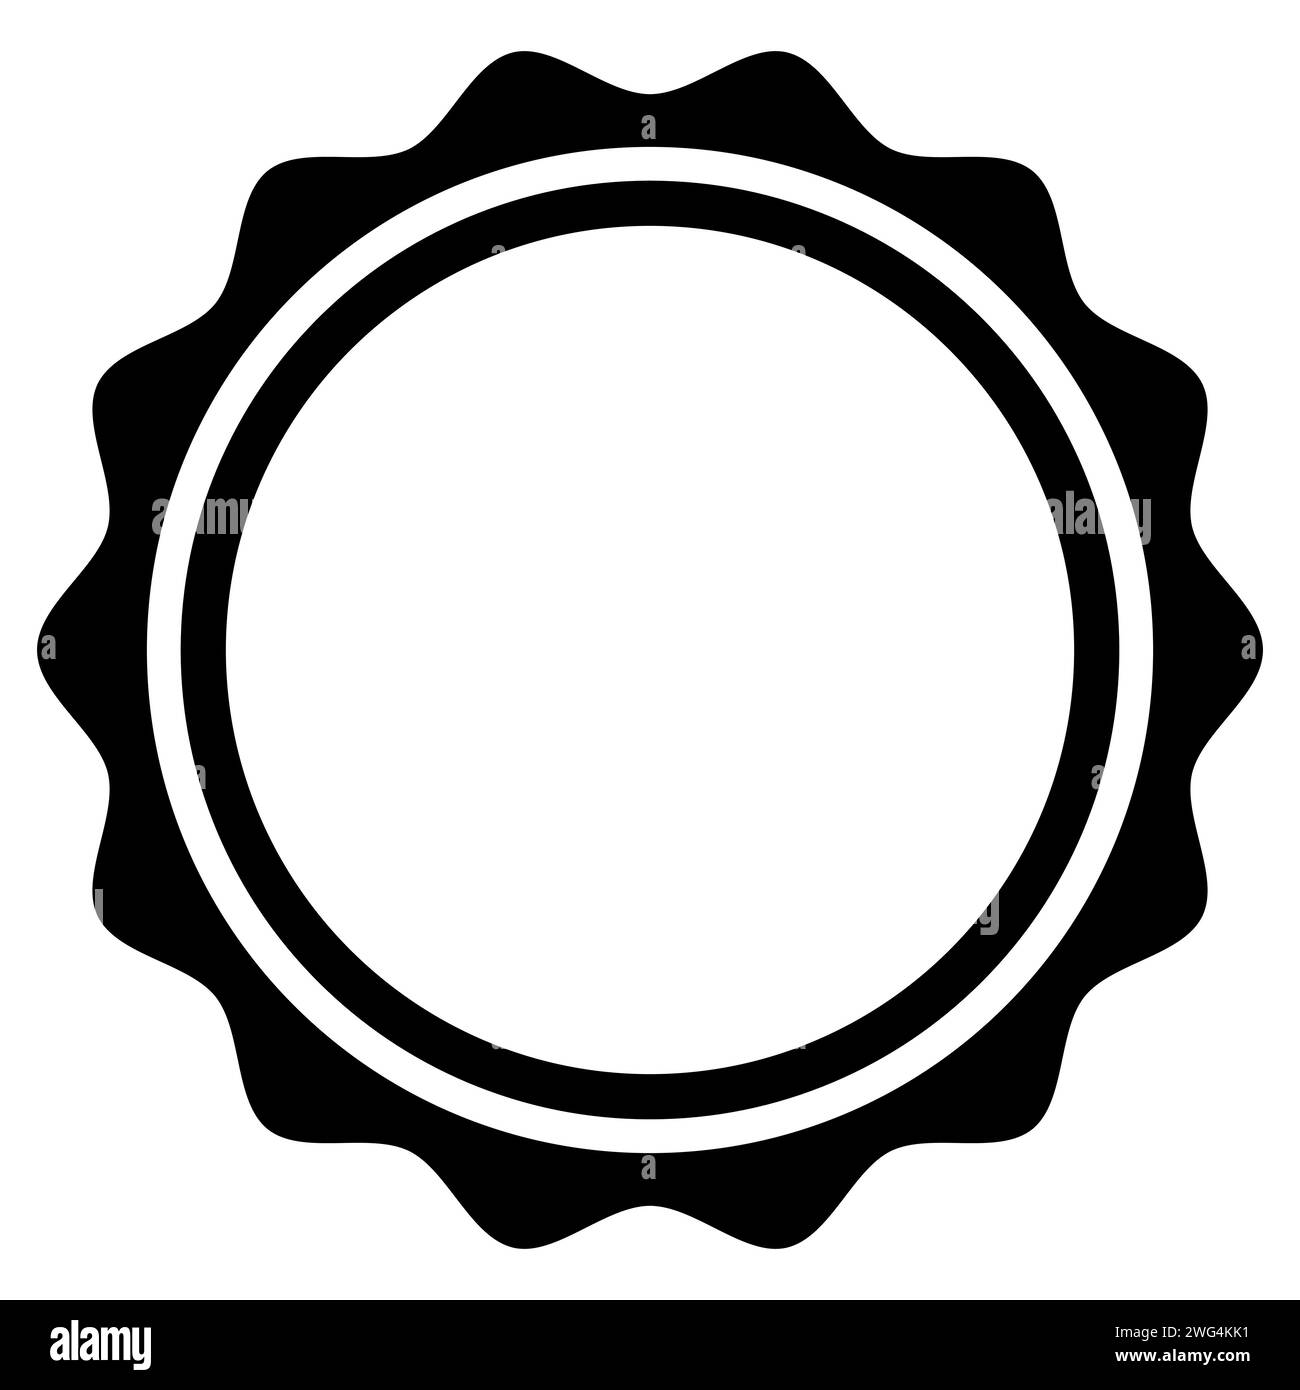 Lace circular stamp, lace stamp petals price tag promotional item Stock Vector